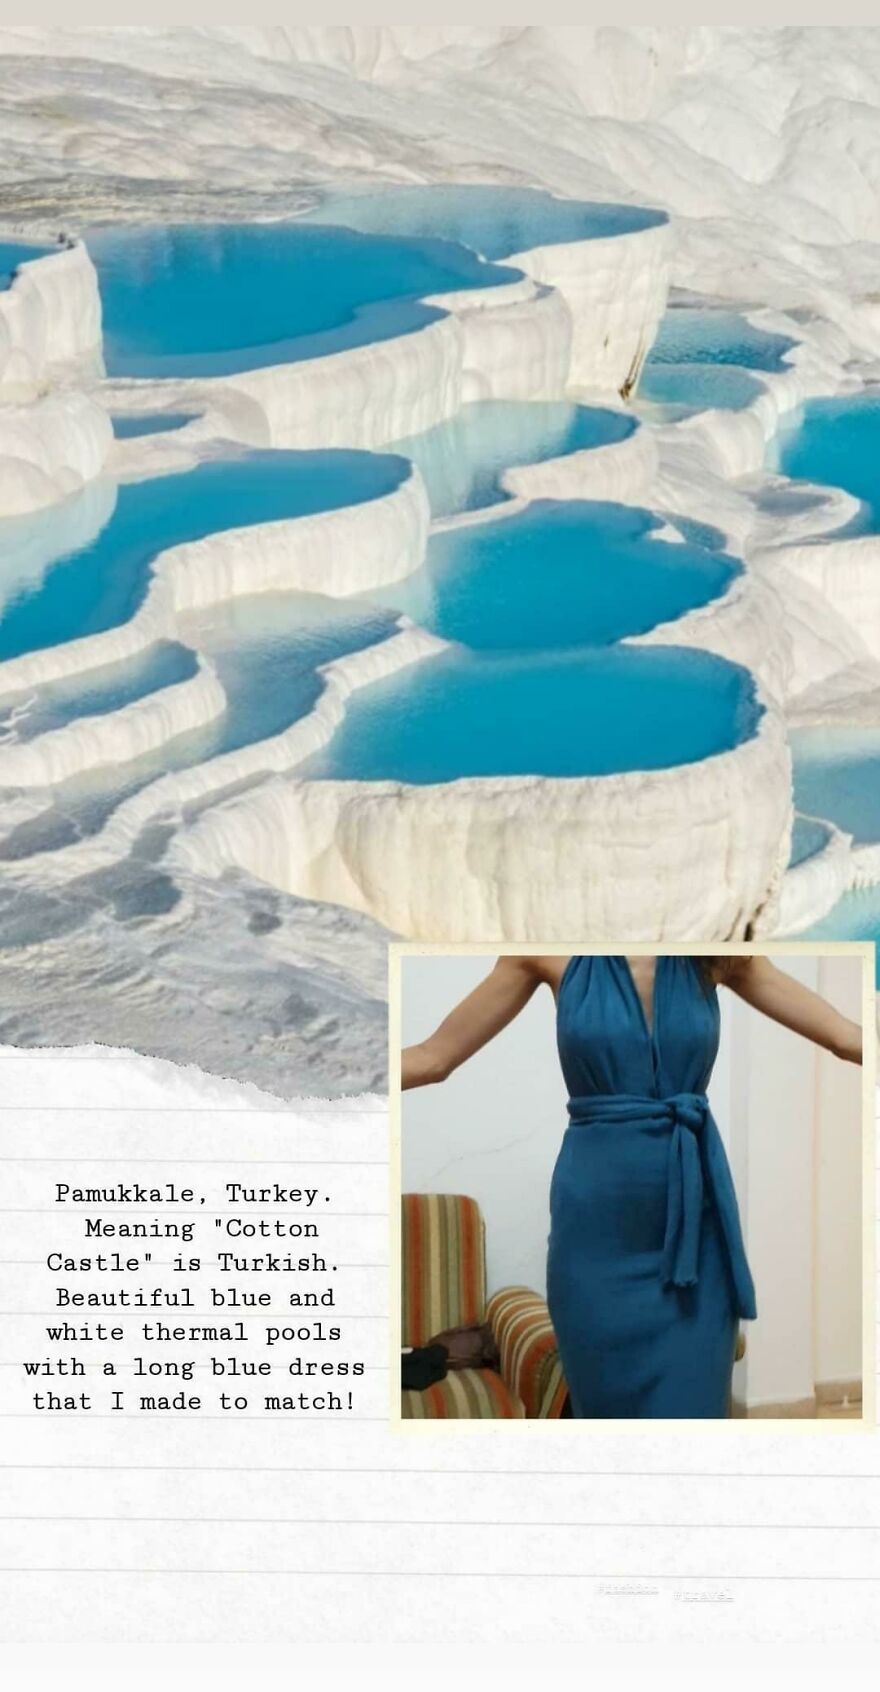 Traveling Fashion Design: We Handmade 3 Fashion Outfits Specifically For Our Trip To Turkey